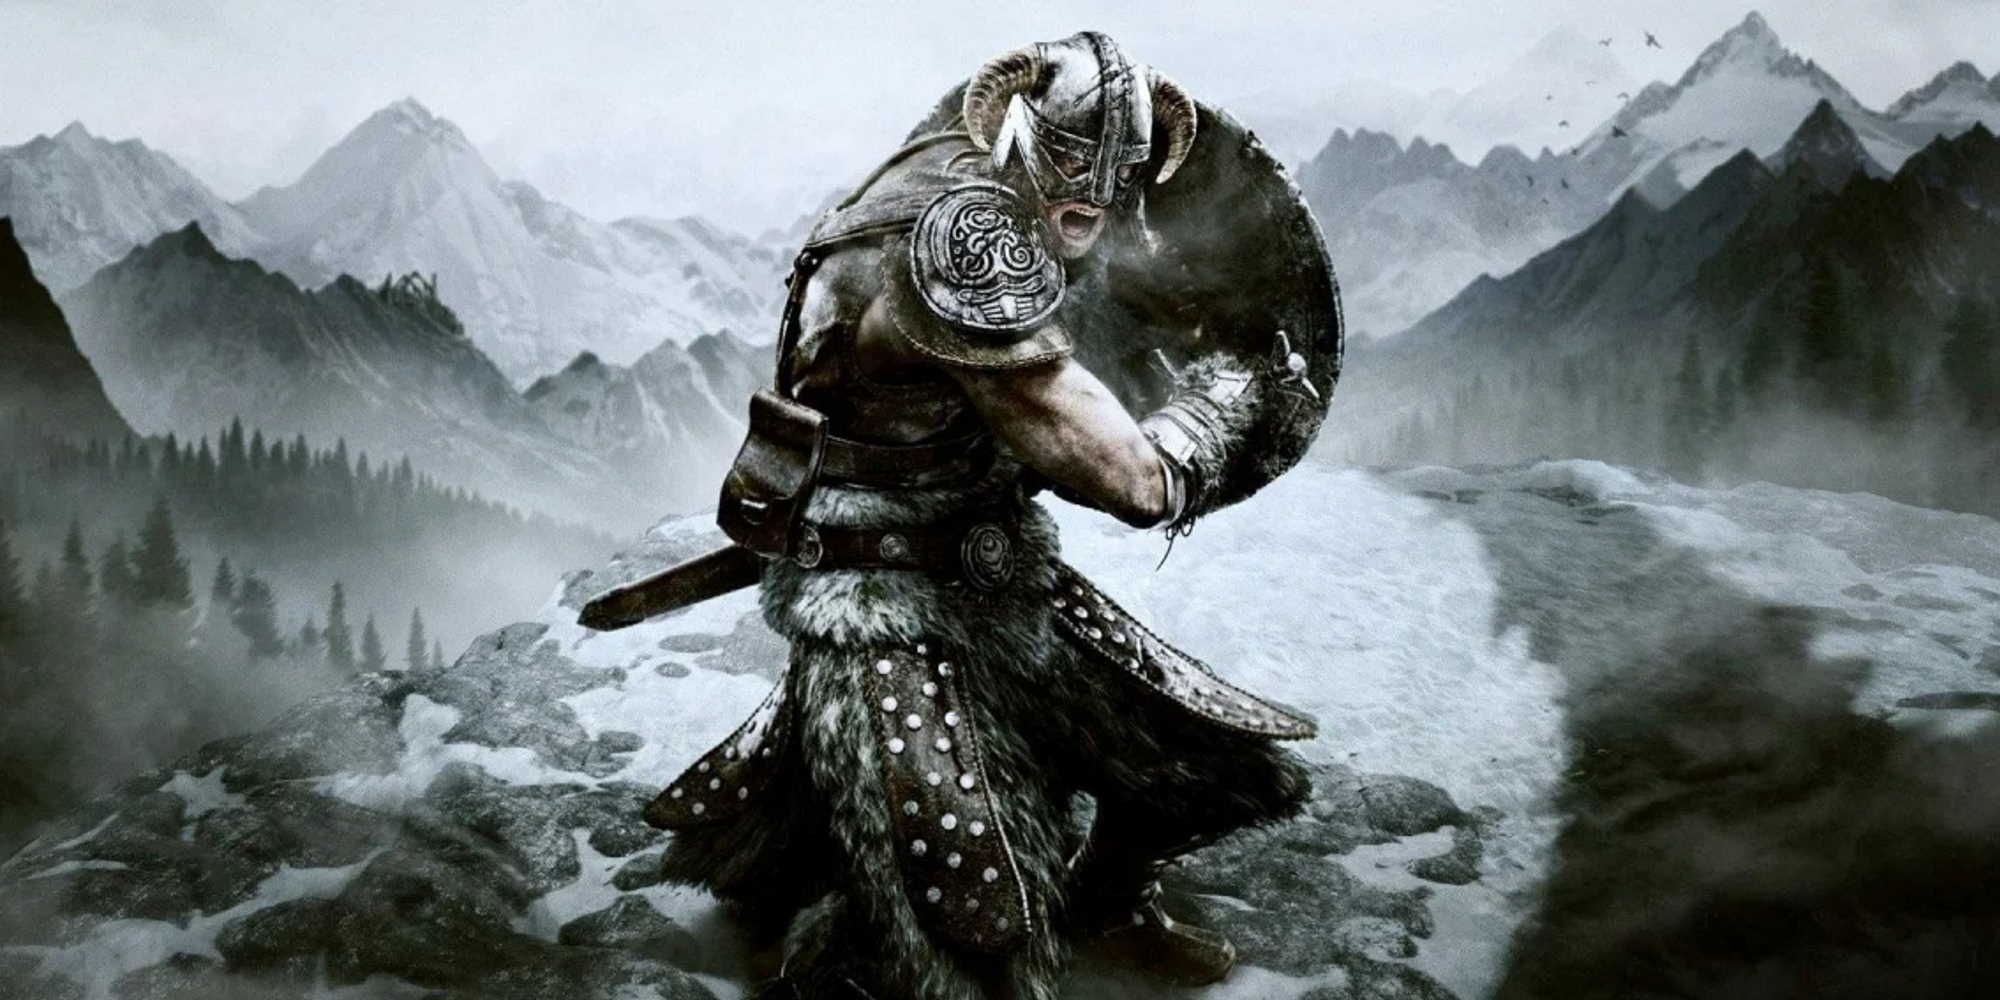 Skyrim viking character holding a shield in a snowy environment